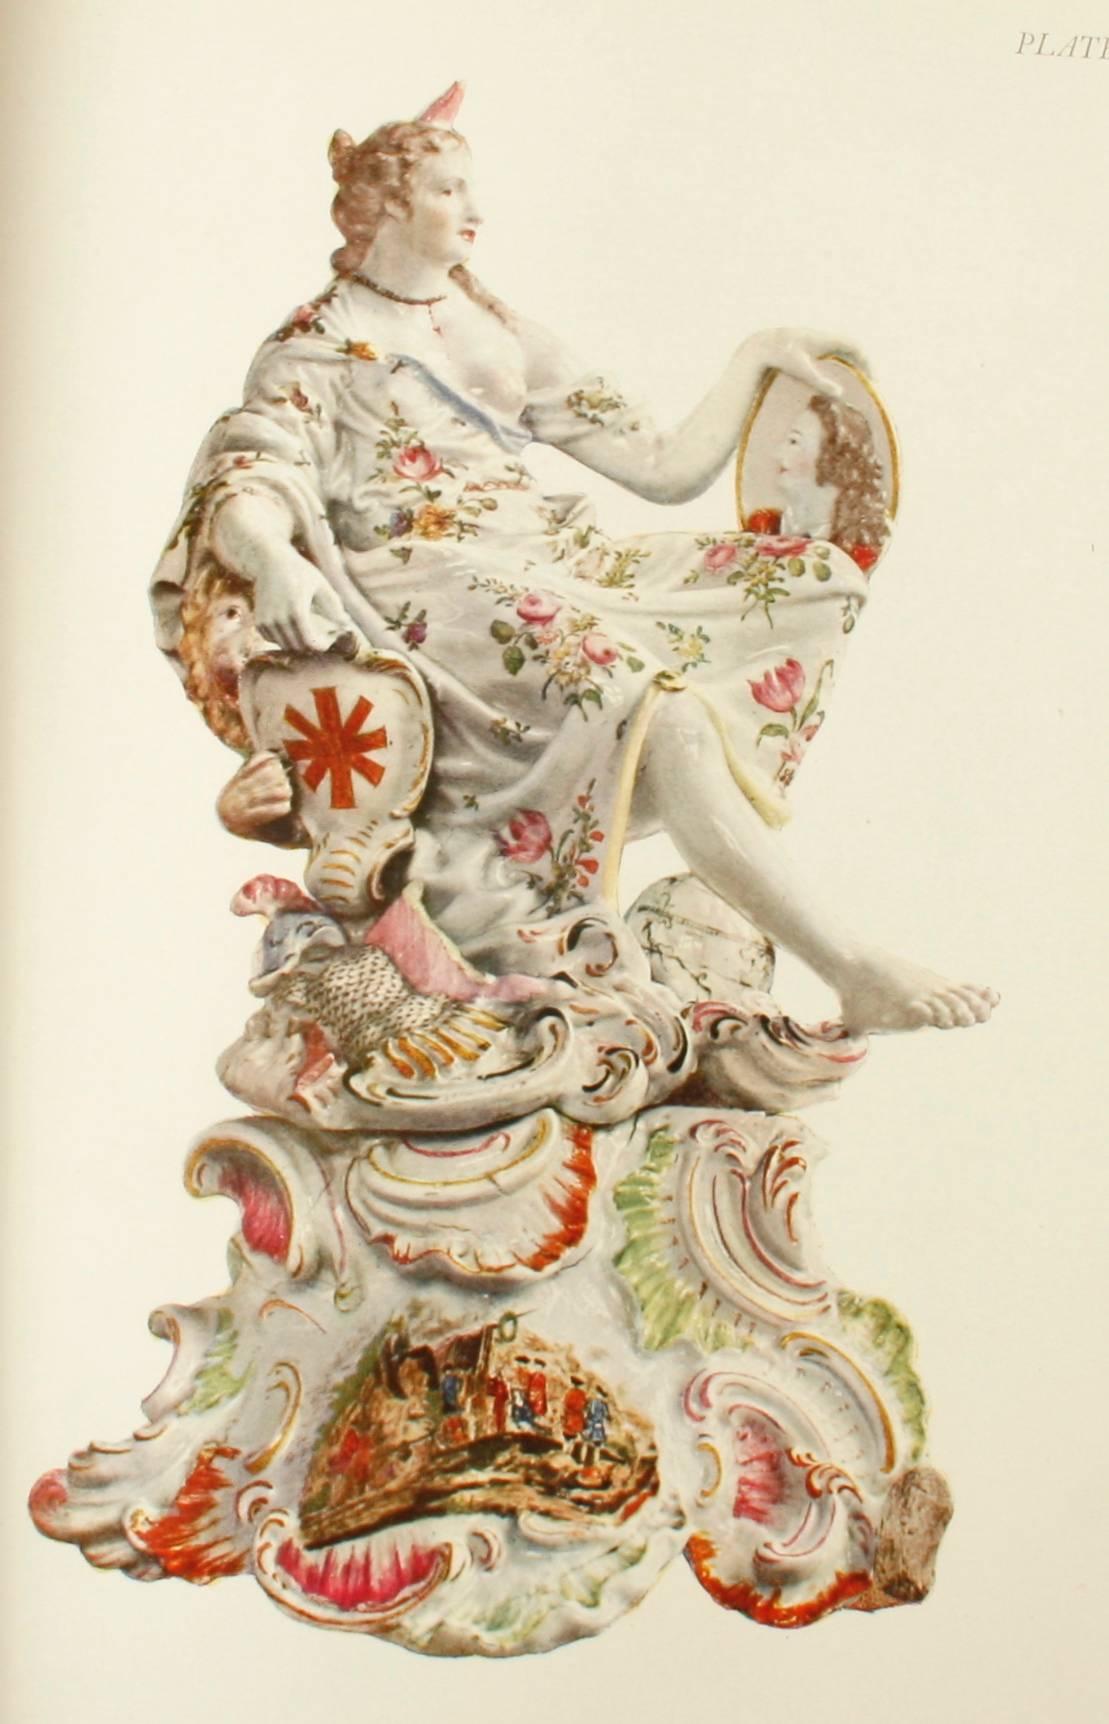 Paper 18th Century English Porcelain Figures by William King, 1st Ed For Sale